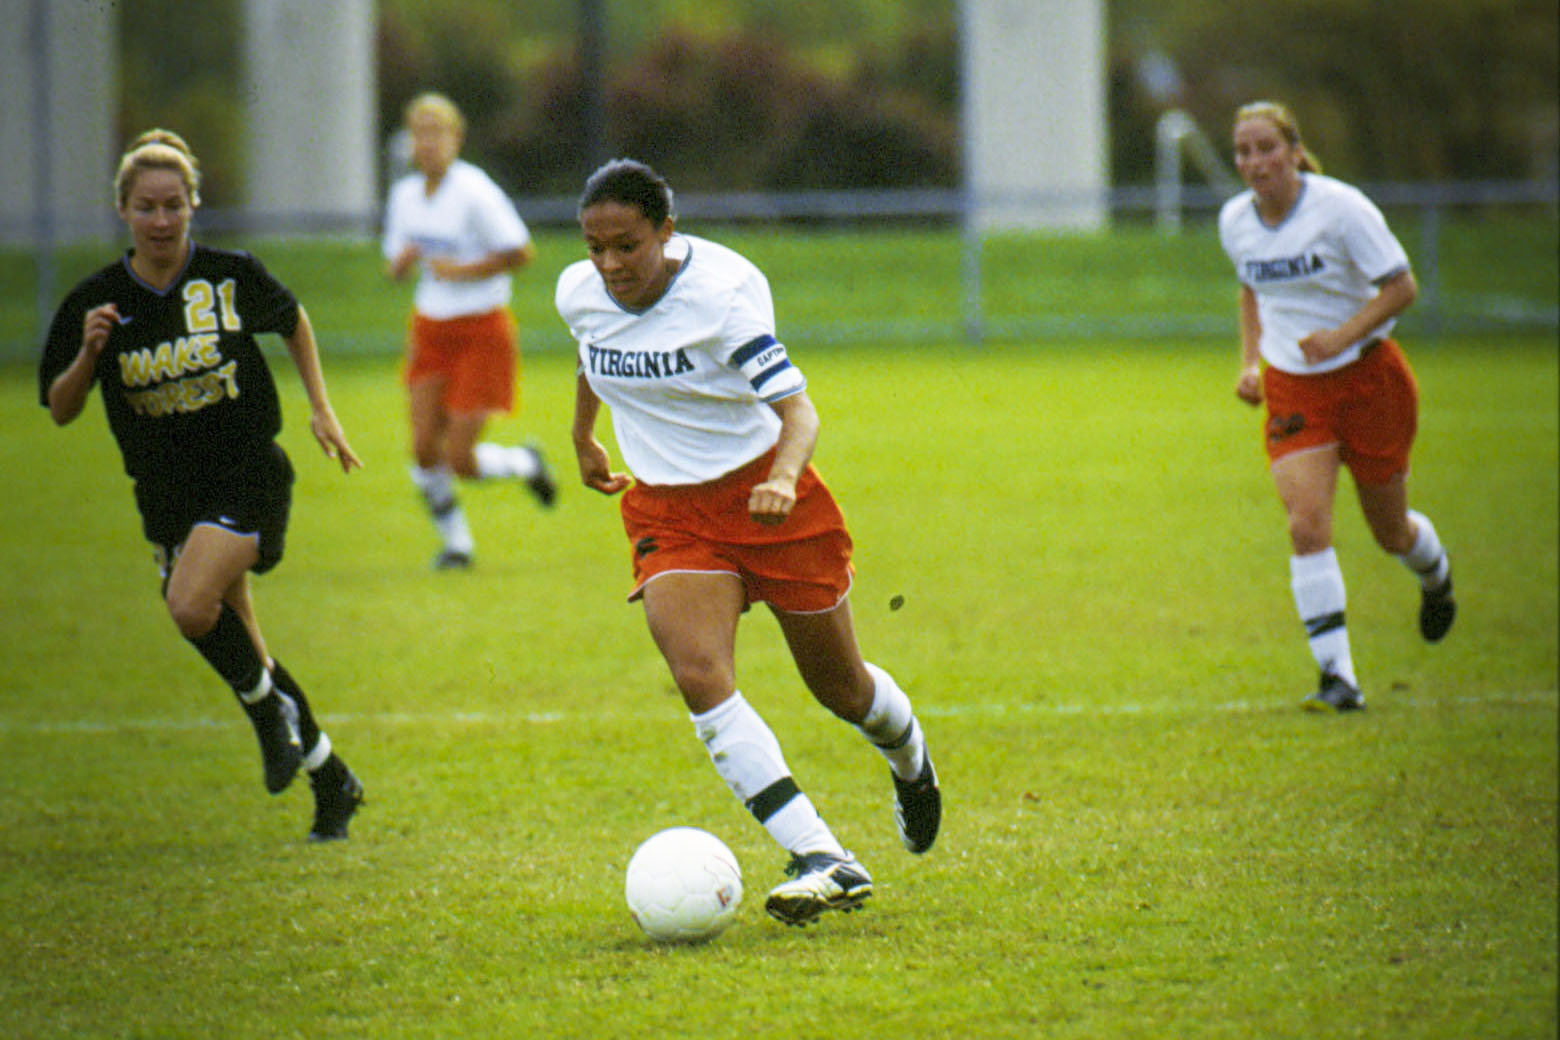 Hucles Mangano taking the soccer ball down field during a game with opponents chasing her